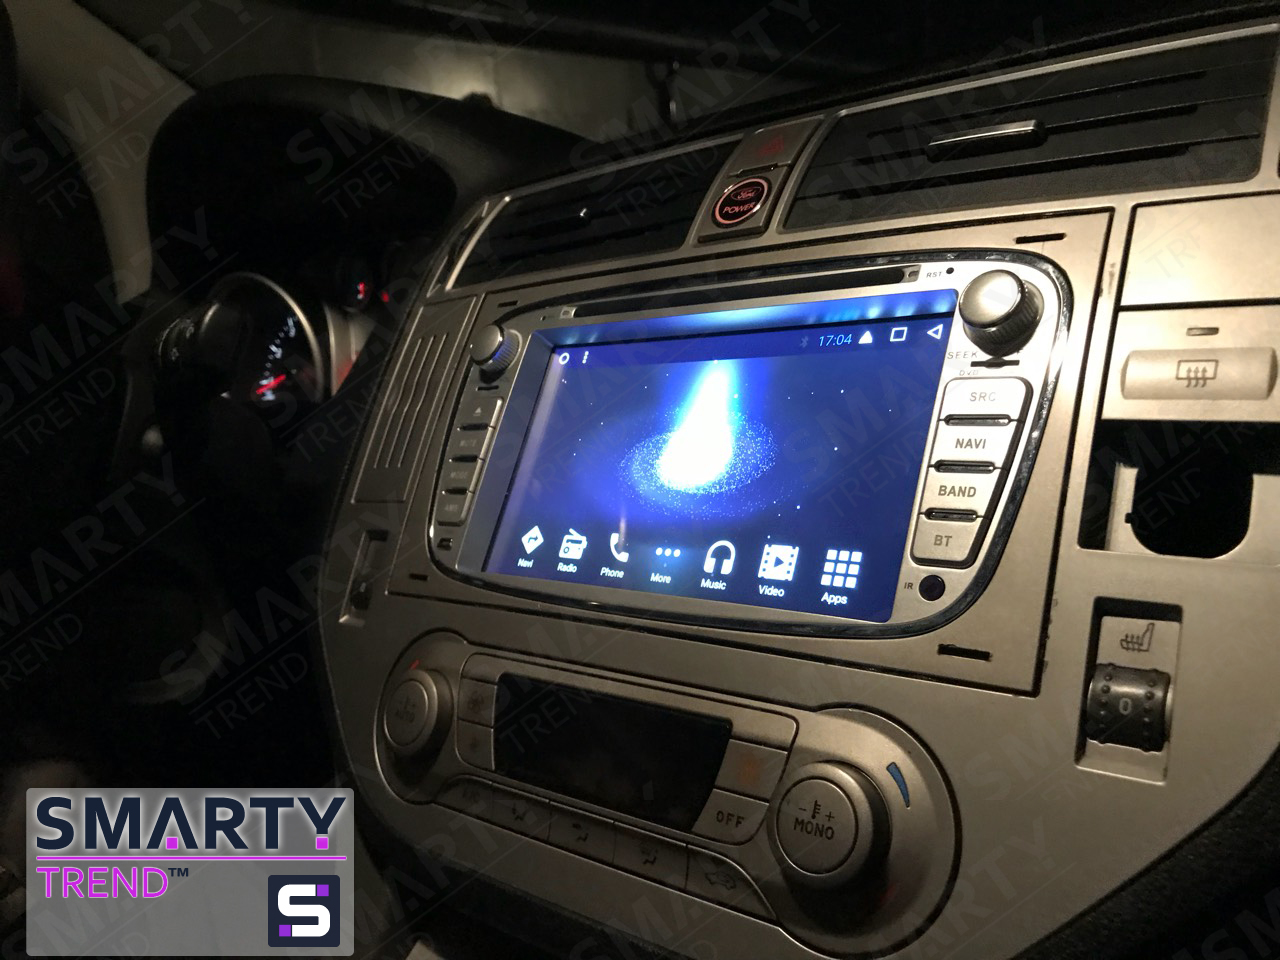 SMARTY Trend head unit for Ford Kuga